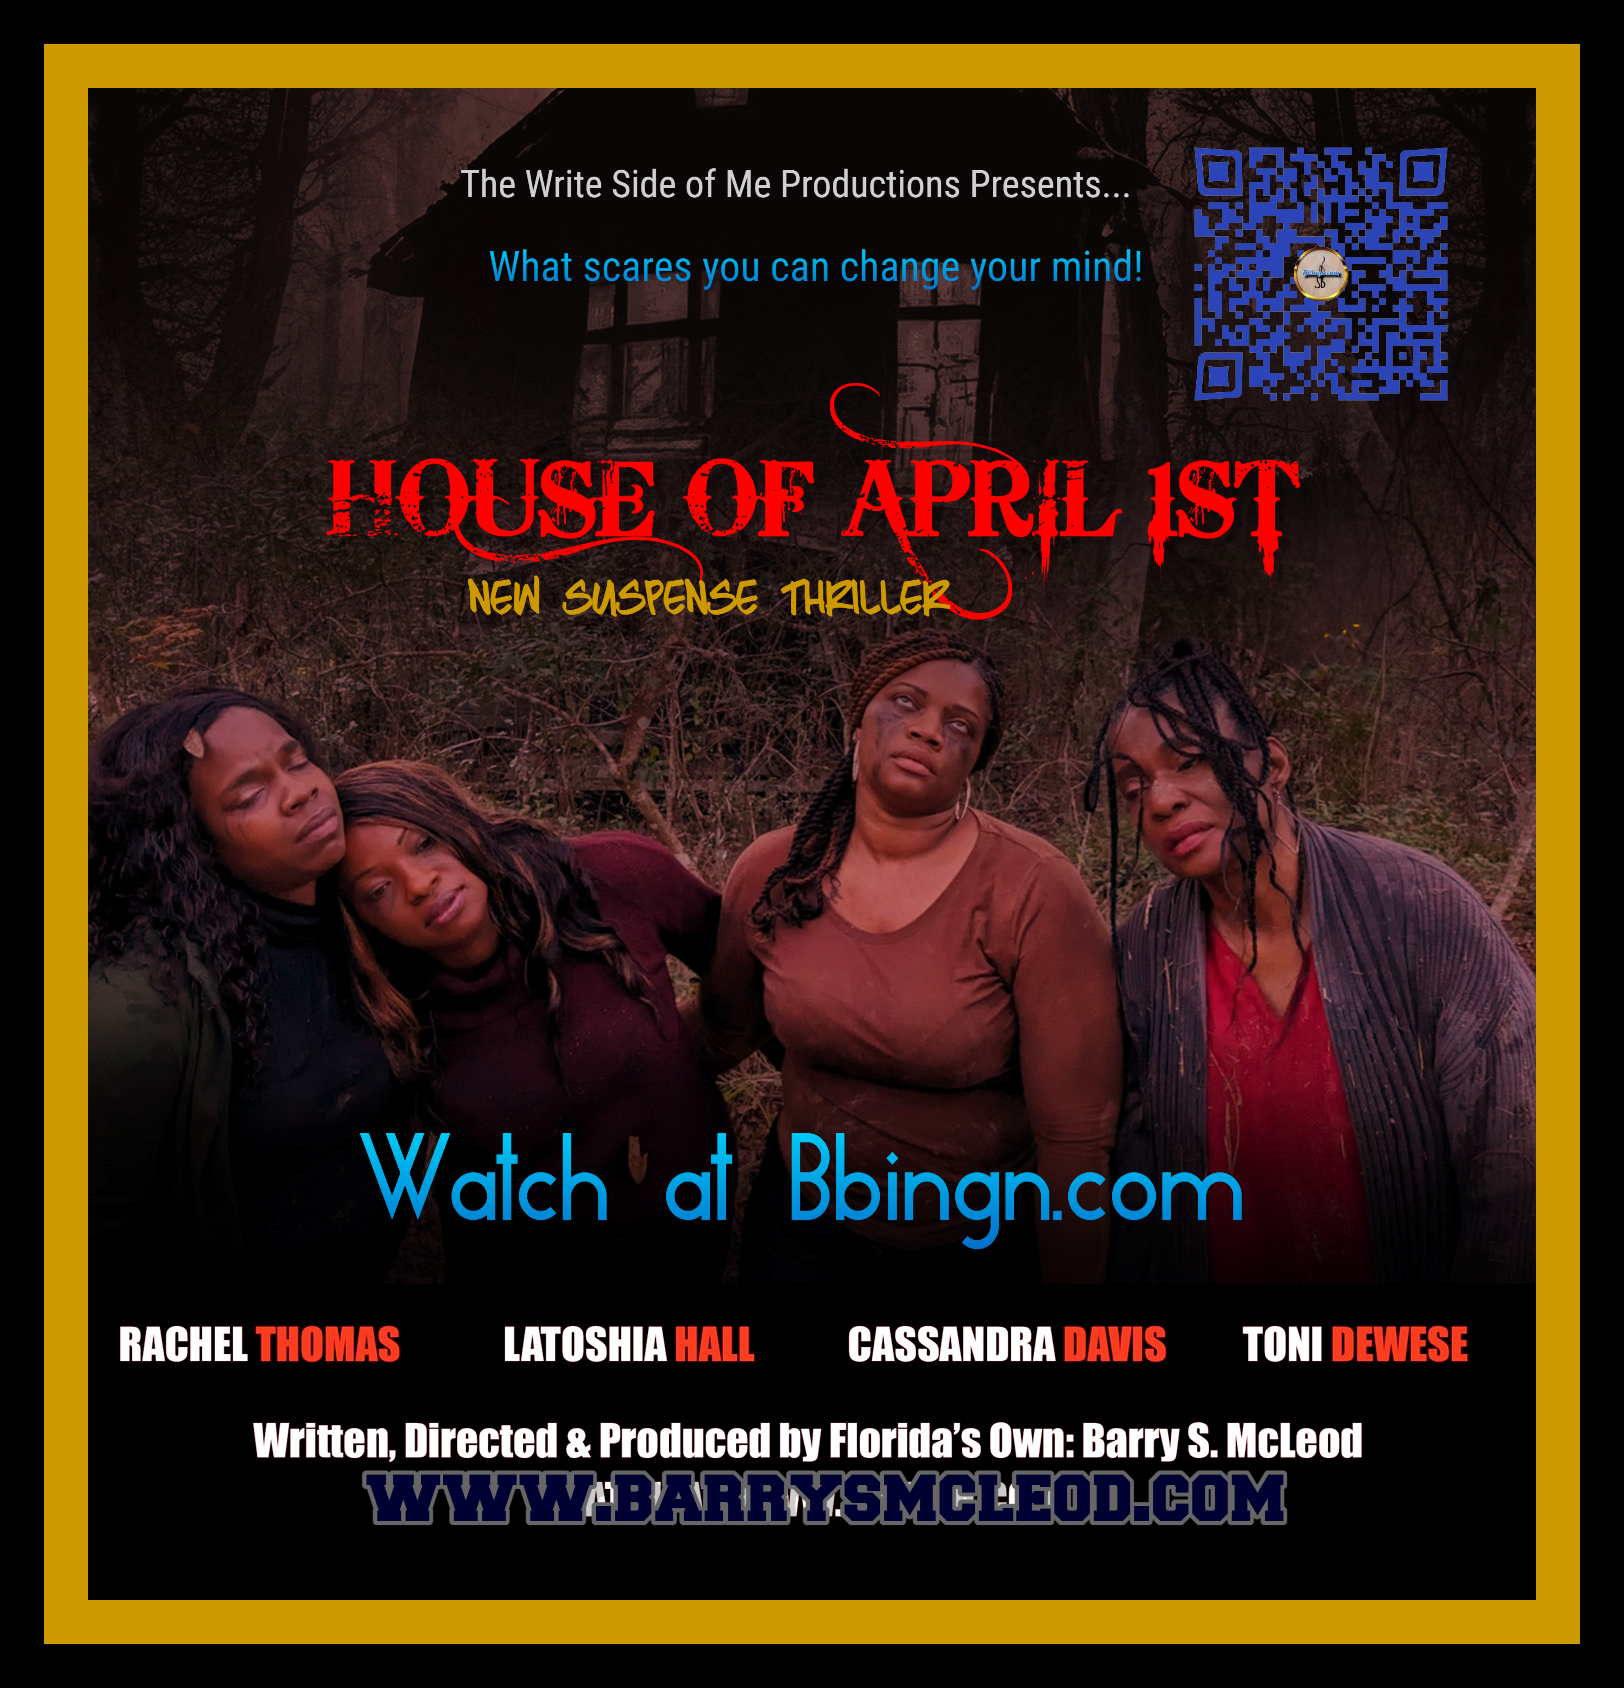 Florida’s Own, Barry S. Mcleod Delivers New Thriller Film: House of April 1st